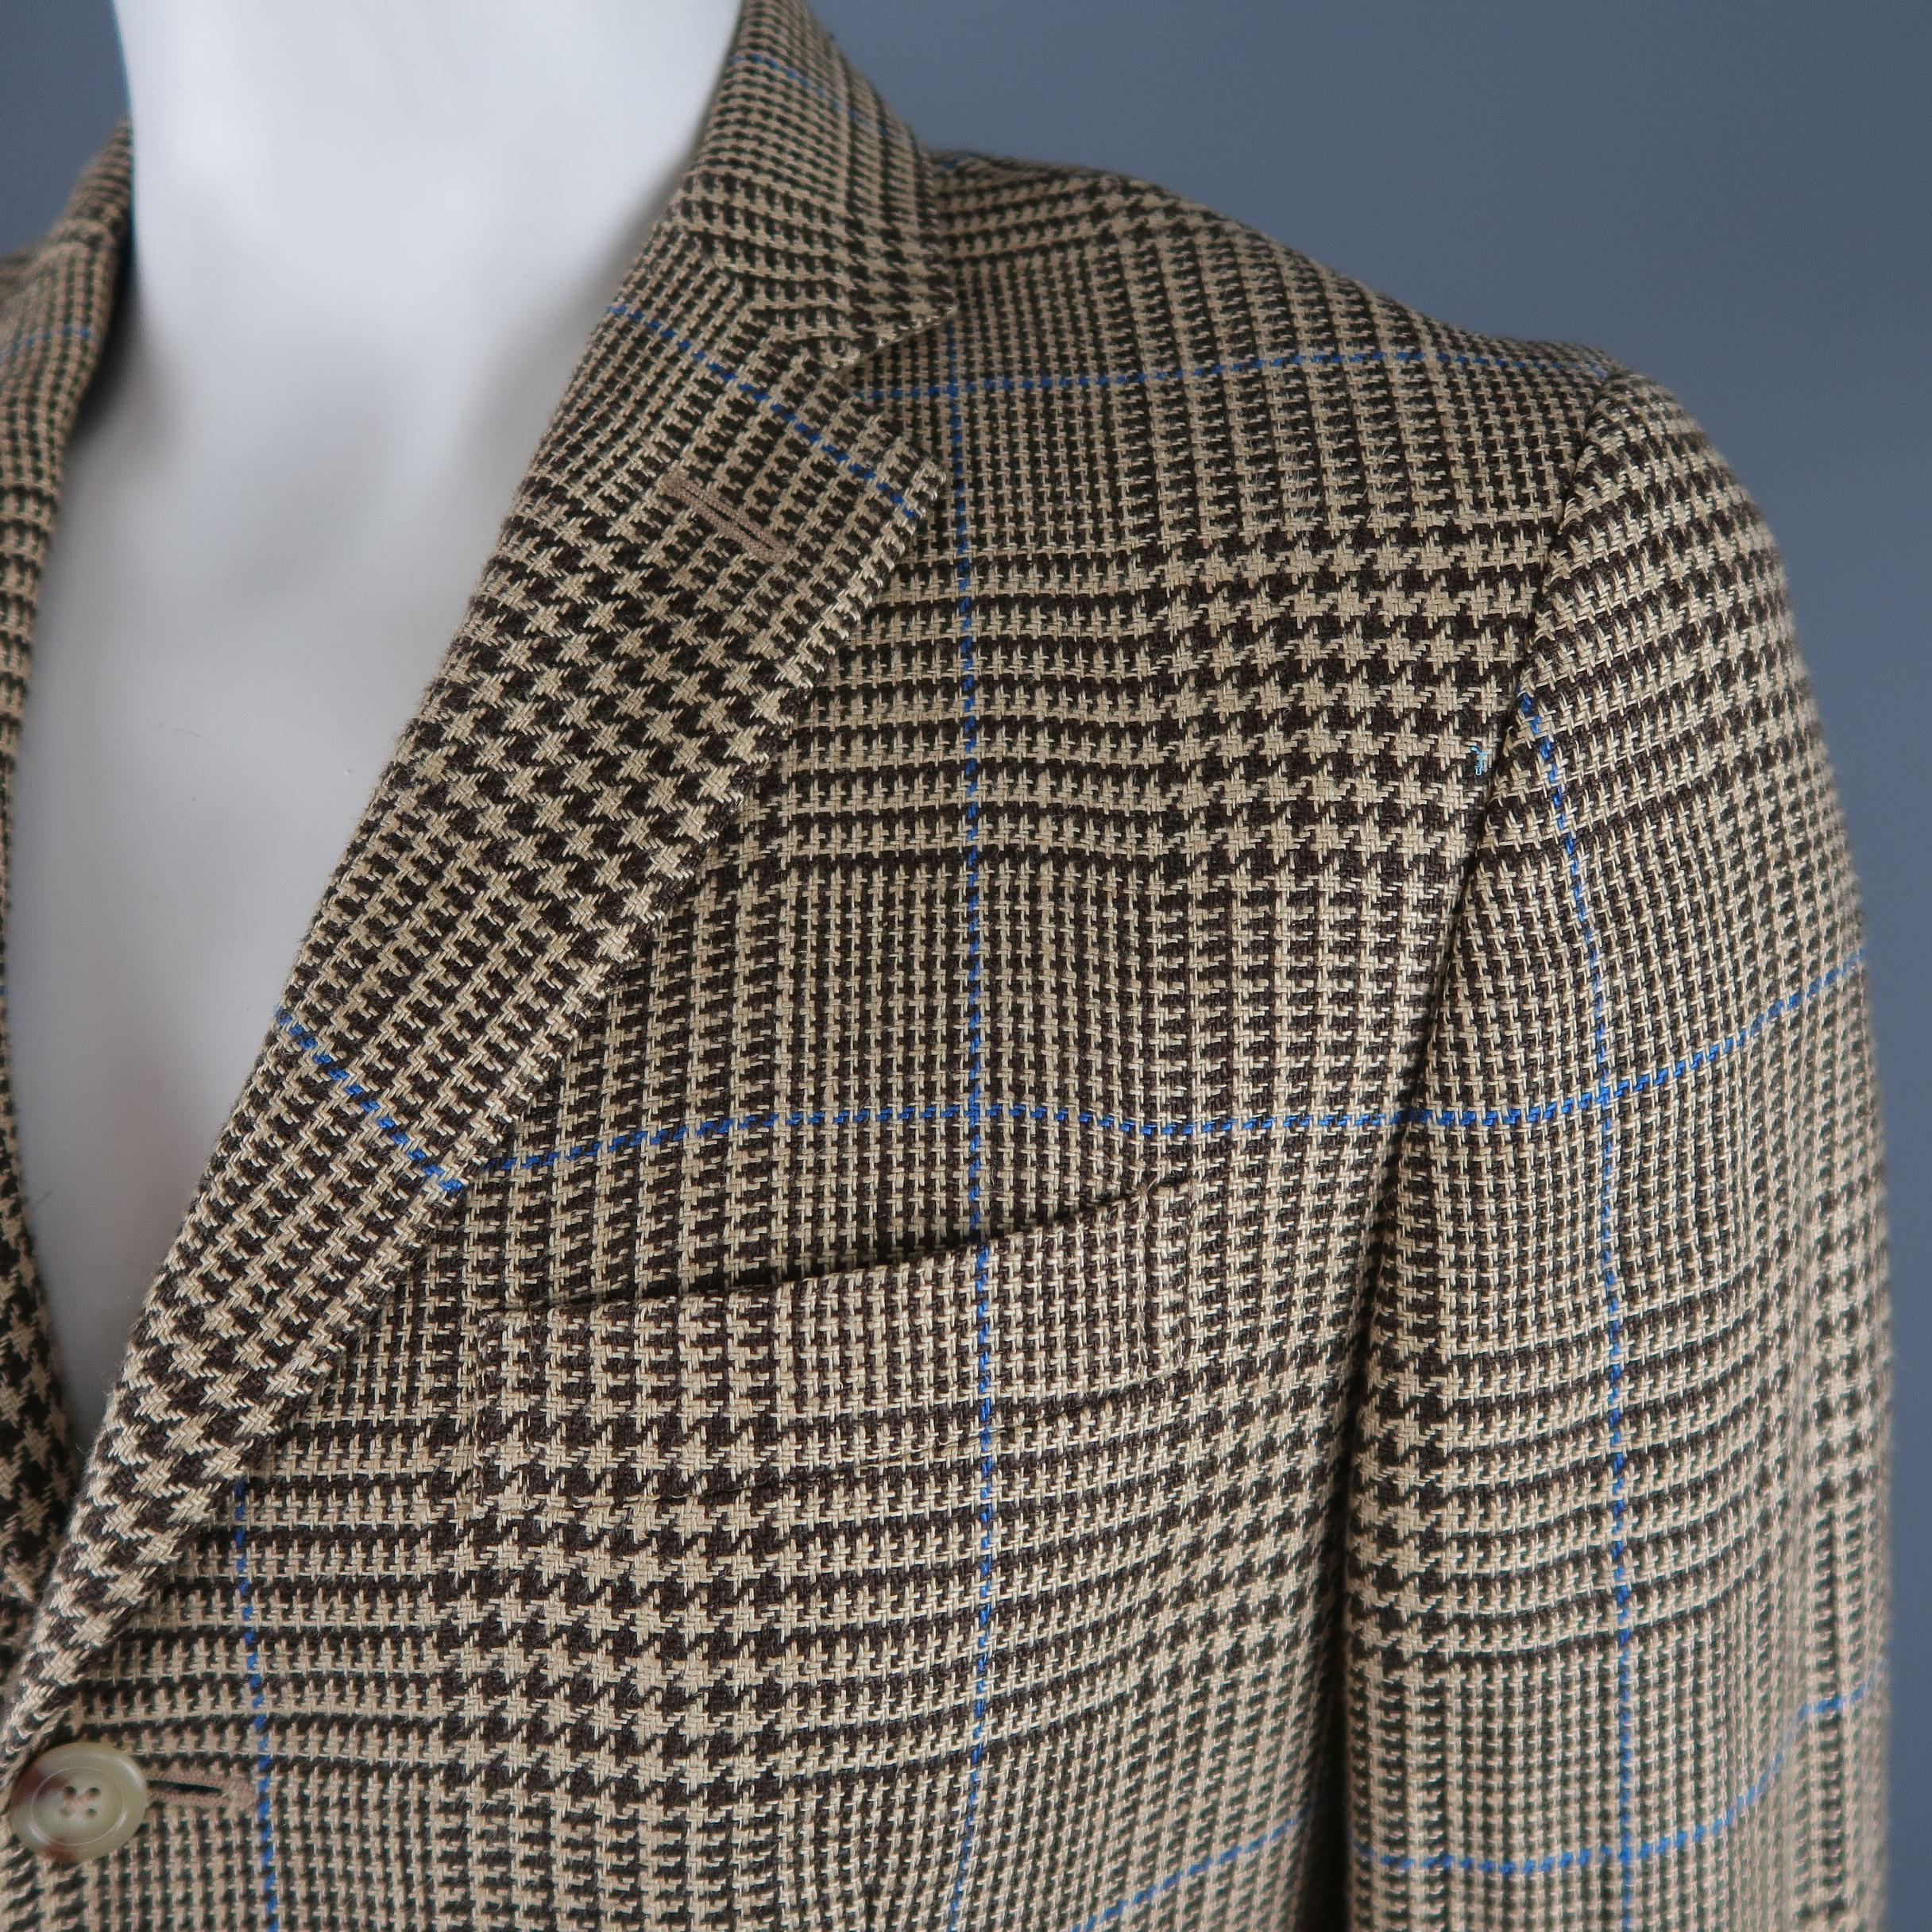 POLO RALPH LAUREN sport coat comes in beige and brown glenplaid with all over blue windowpane pattern woven flax material with a notch lapel, three button single breasted closure, and flap pockets. Made in Italy. Retail price $1,800.00.
 
Excellent